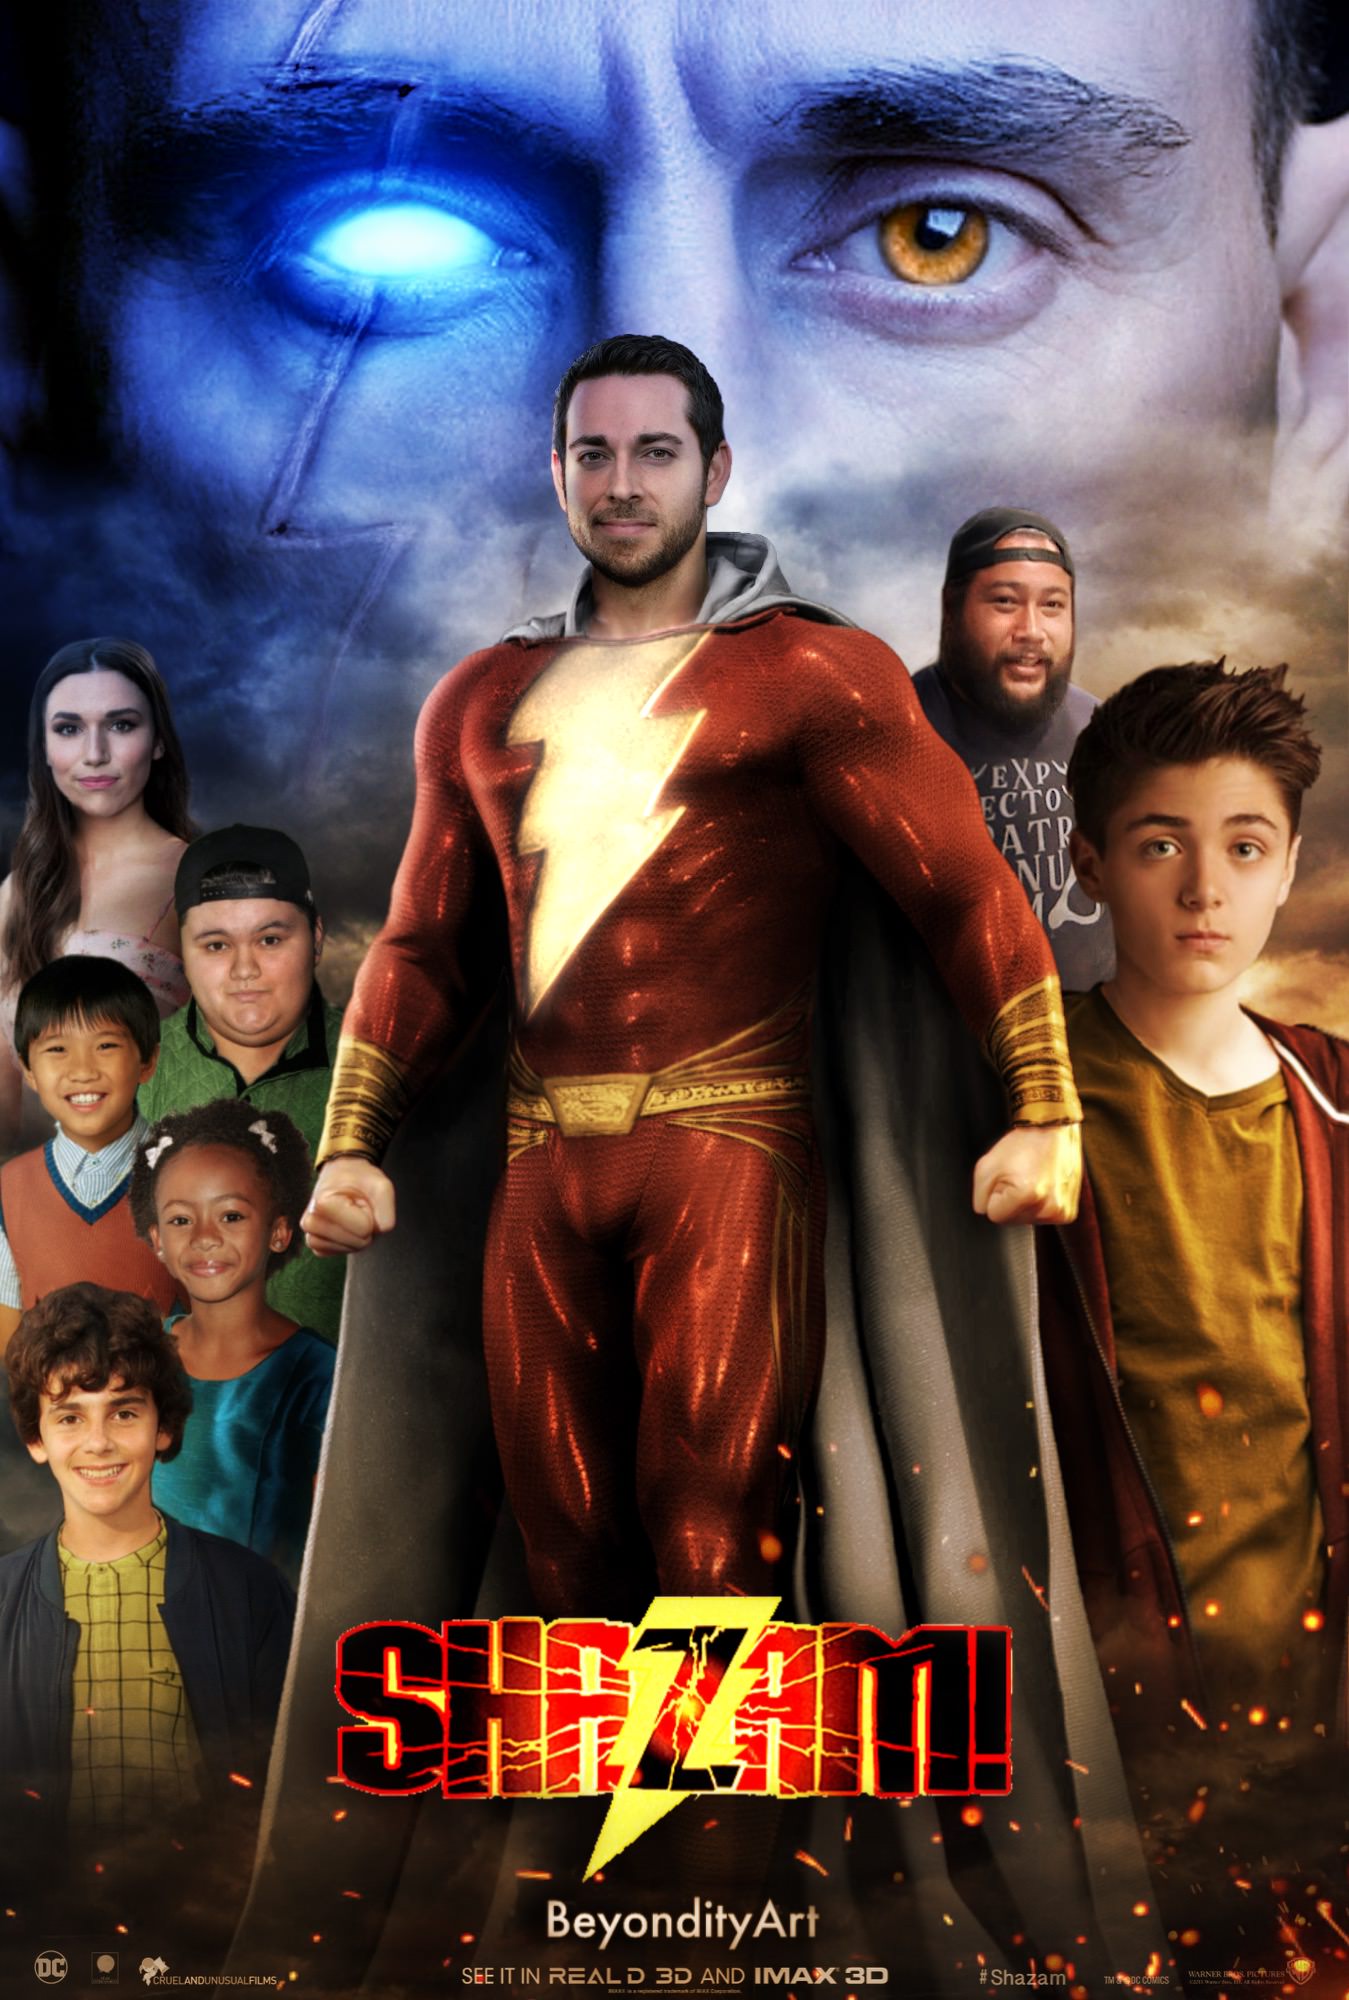 Shazam Wiki Trailer Star Cast Collection Lifetime Earning Full Details Box Office Gallery Shazam will name your song in seconds. shazam wiki trailer star cast